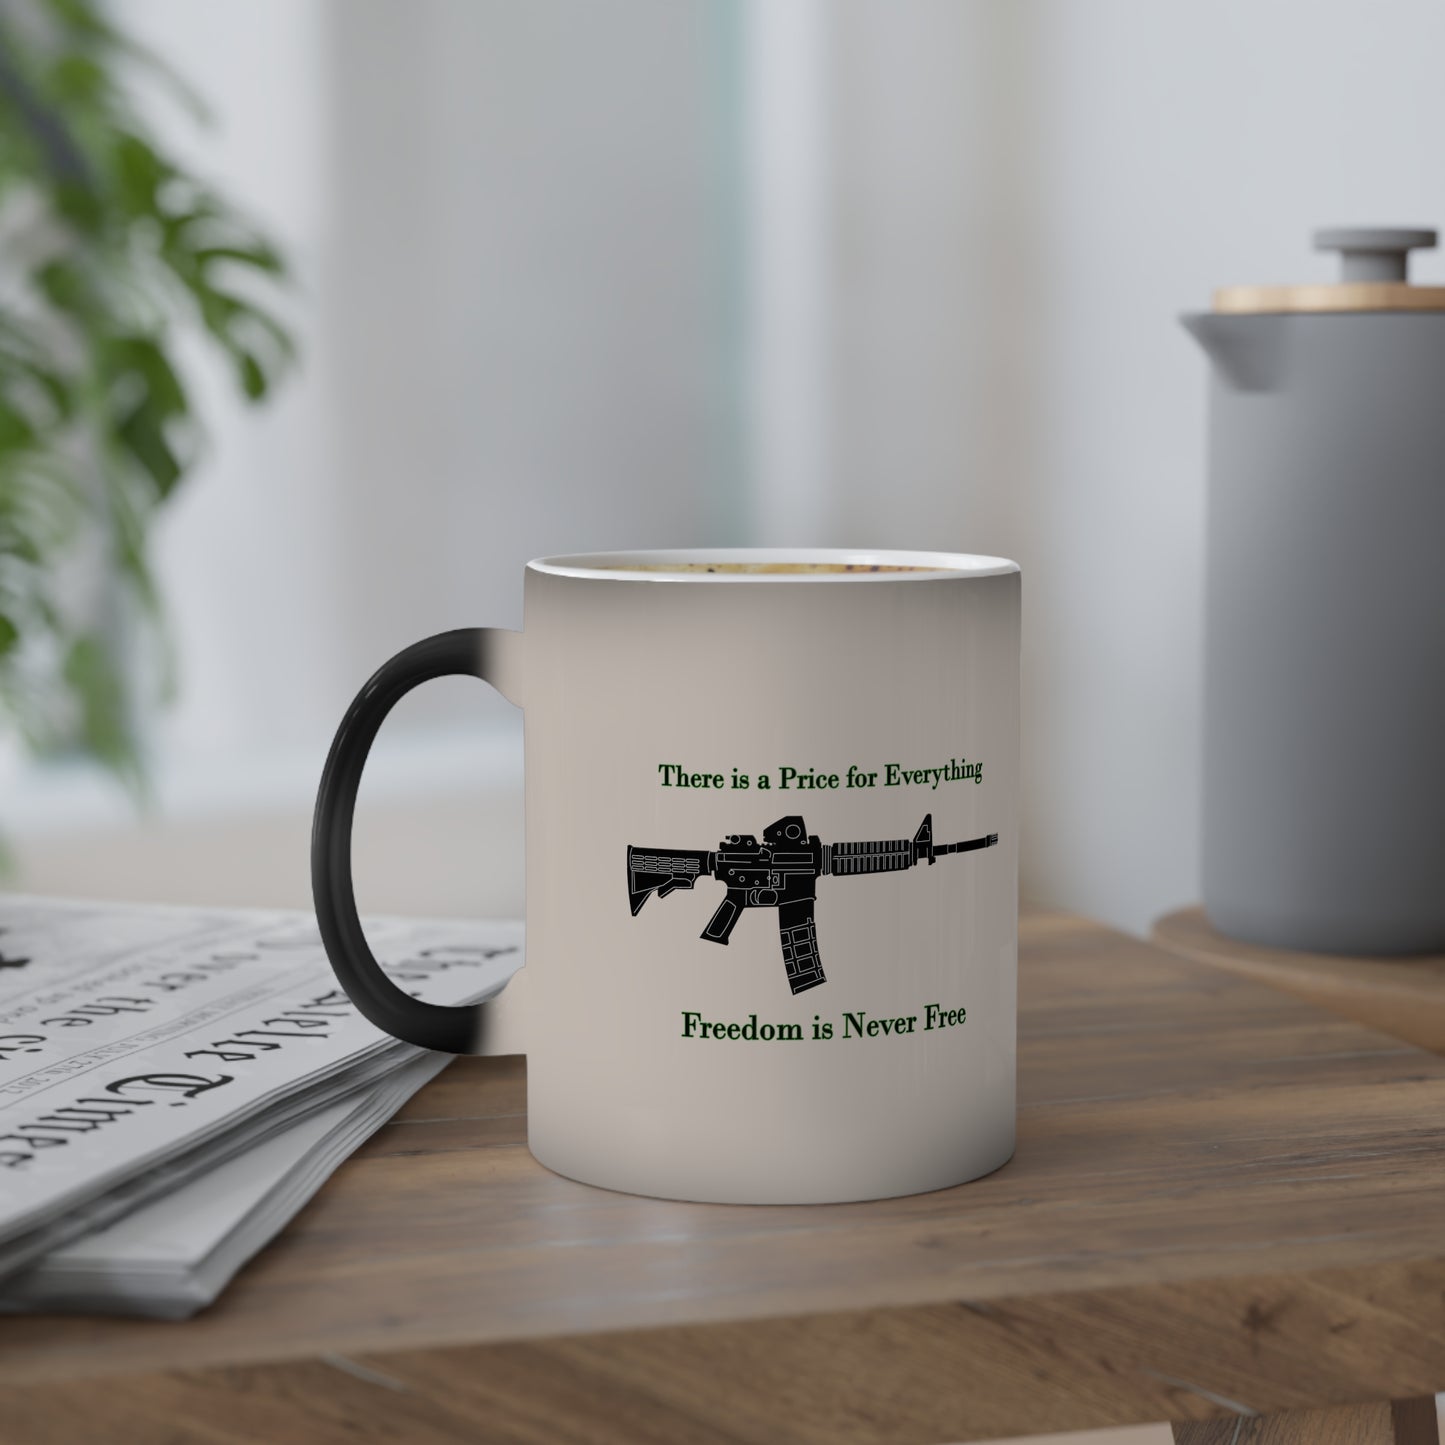 Freedom in Never Free Color-Changing Mug, 11oz